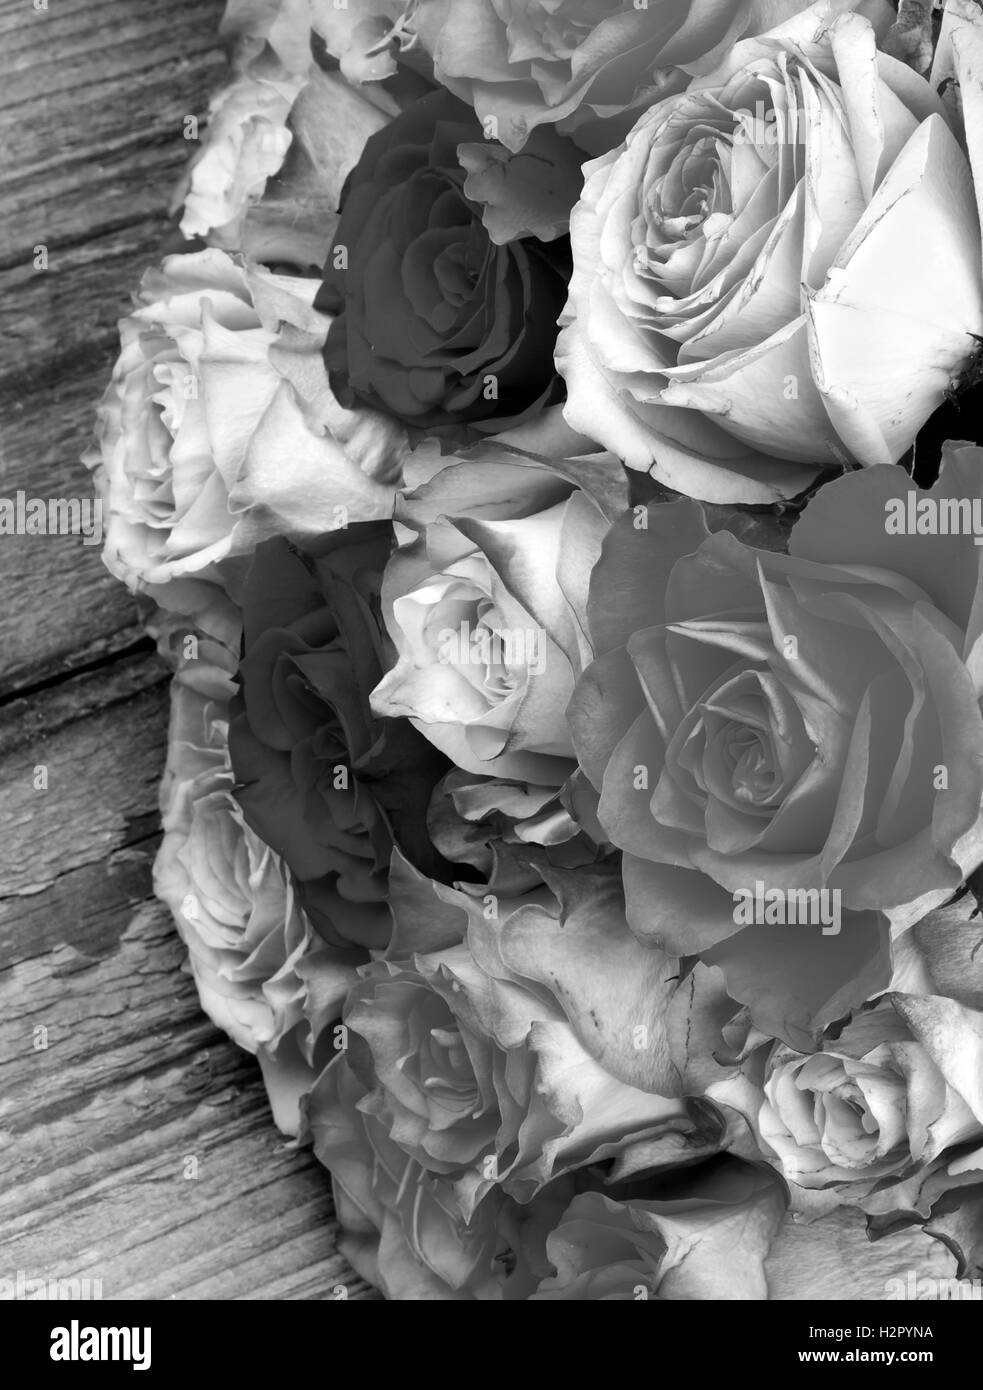 Bunch of Roses Stock Photo